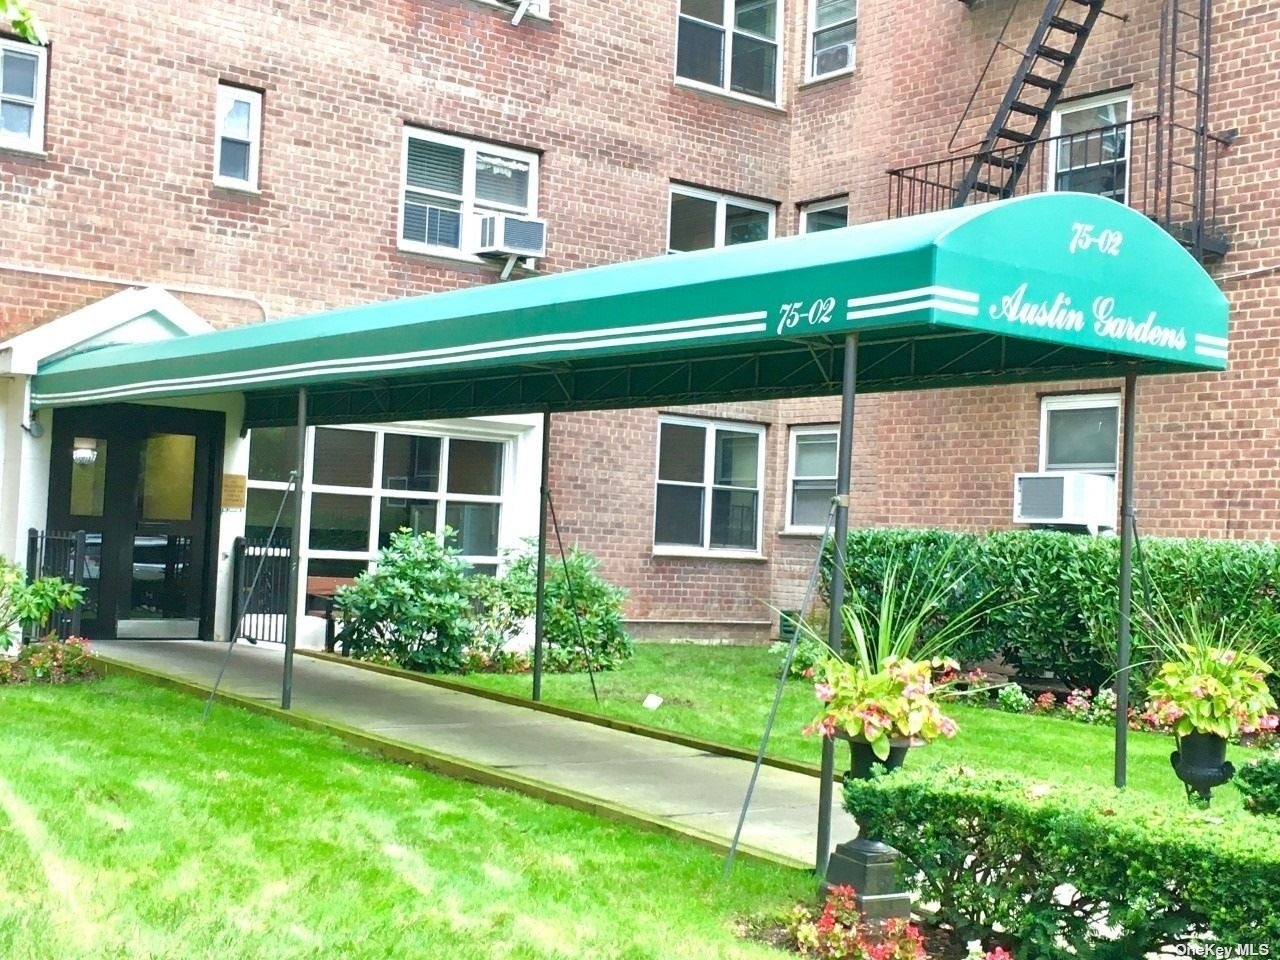 Property at 75-02 Austin Street, 3F Forest Hills, Queens, New York 11375